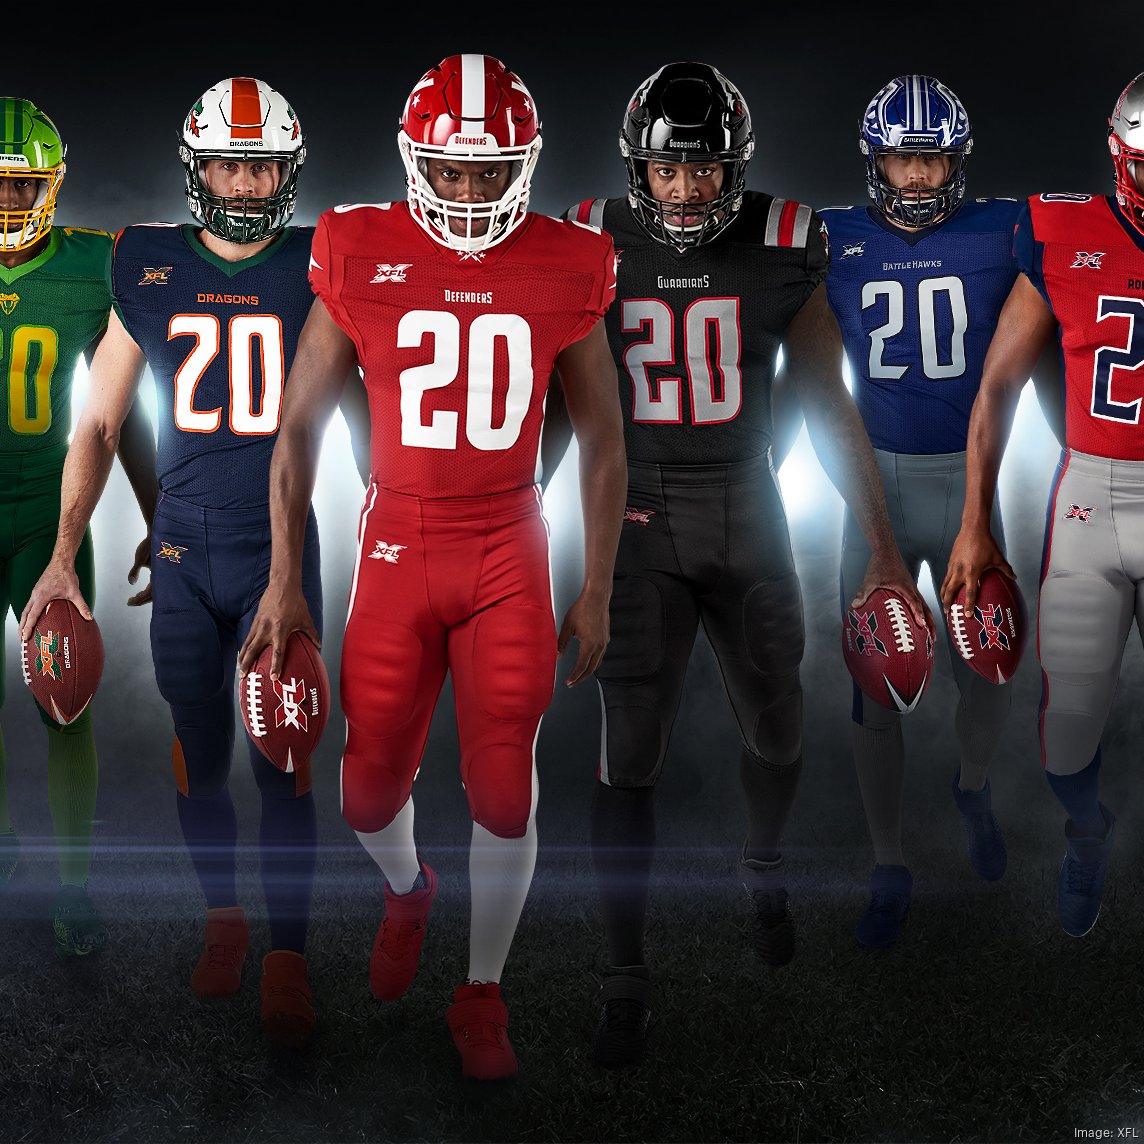 XFL unveils new uniforms for 2020 kickoff - Houston Business Journal